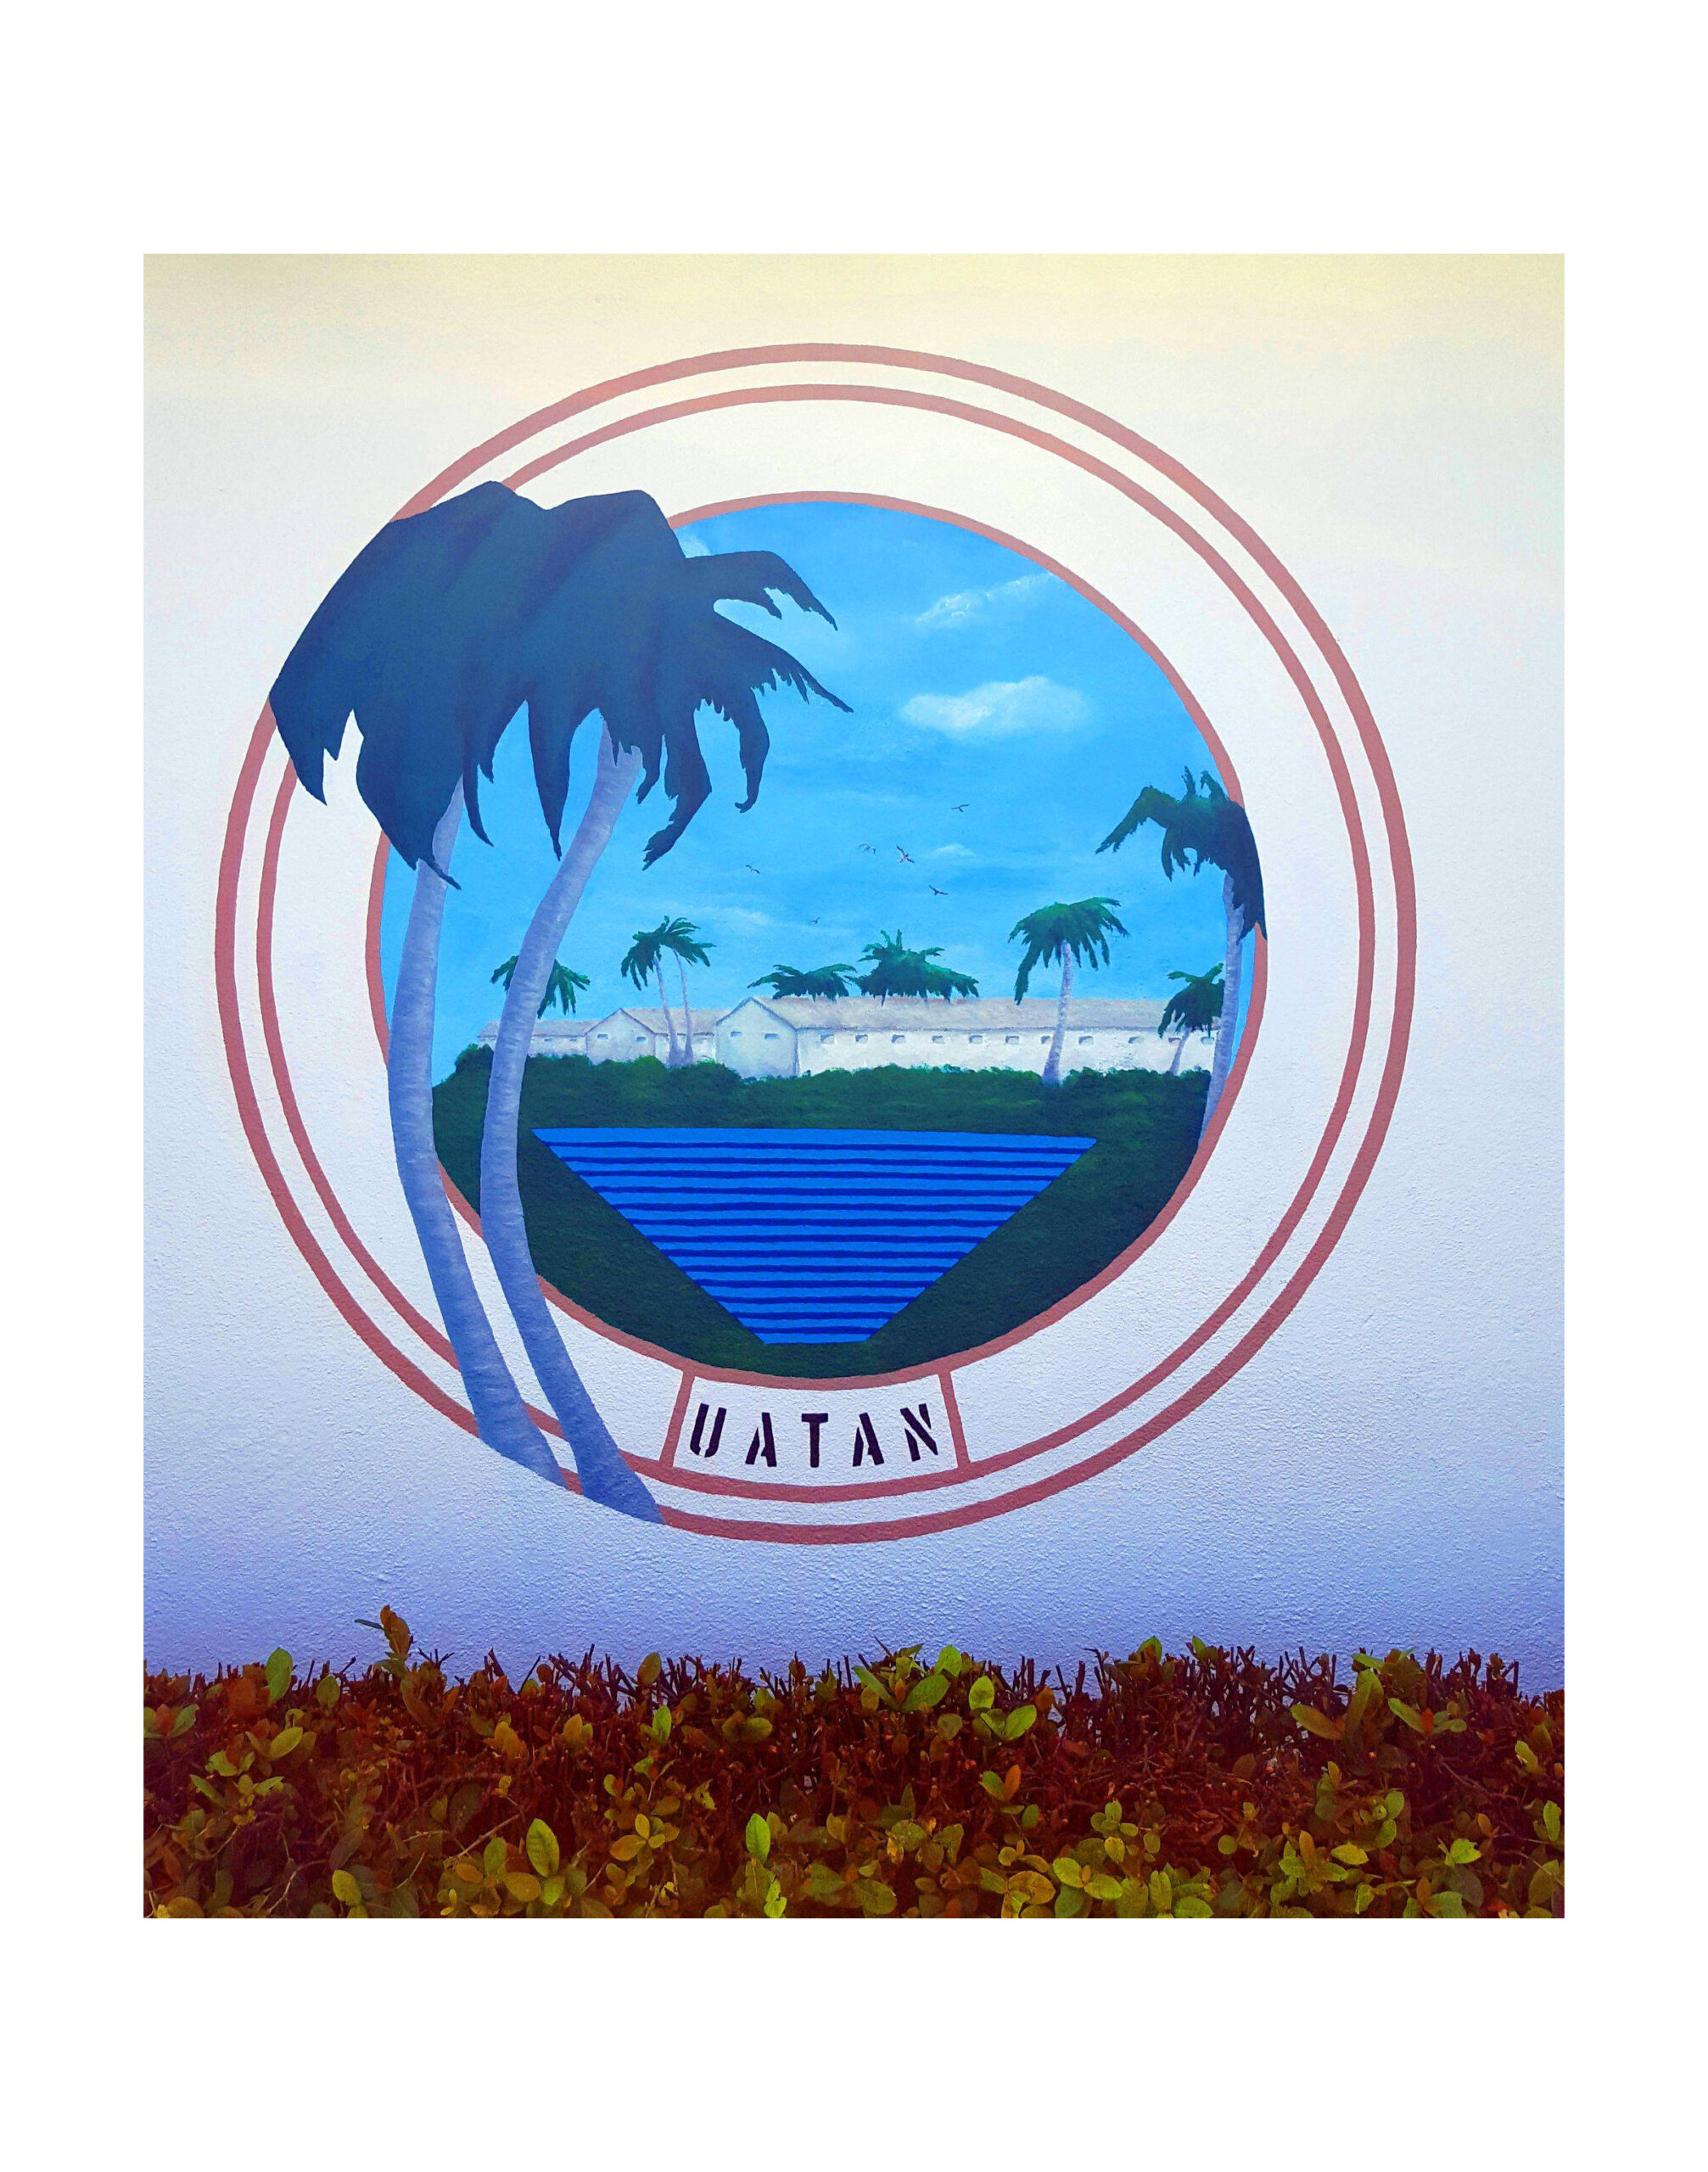 A Coconut Trees and a Building Logo Painted on a Wall